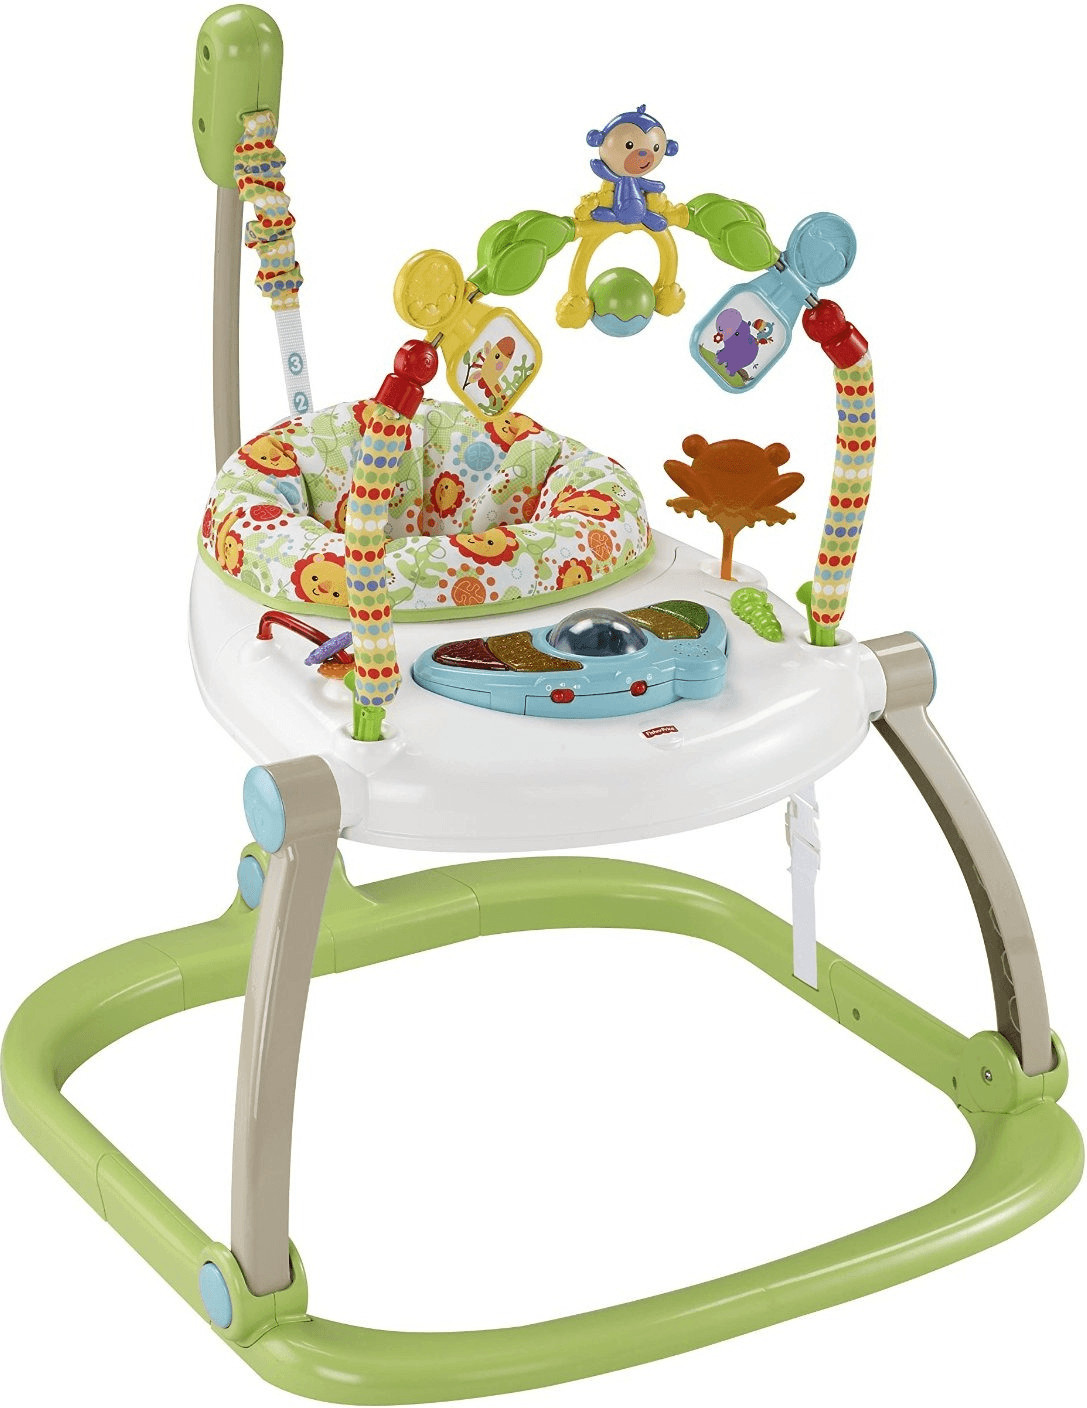 Fisher-Price Rainforest Friends SpaceSaver Jumperoo